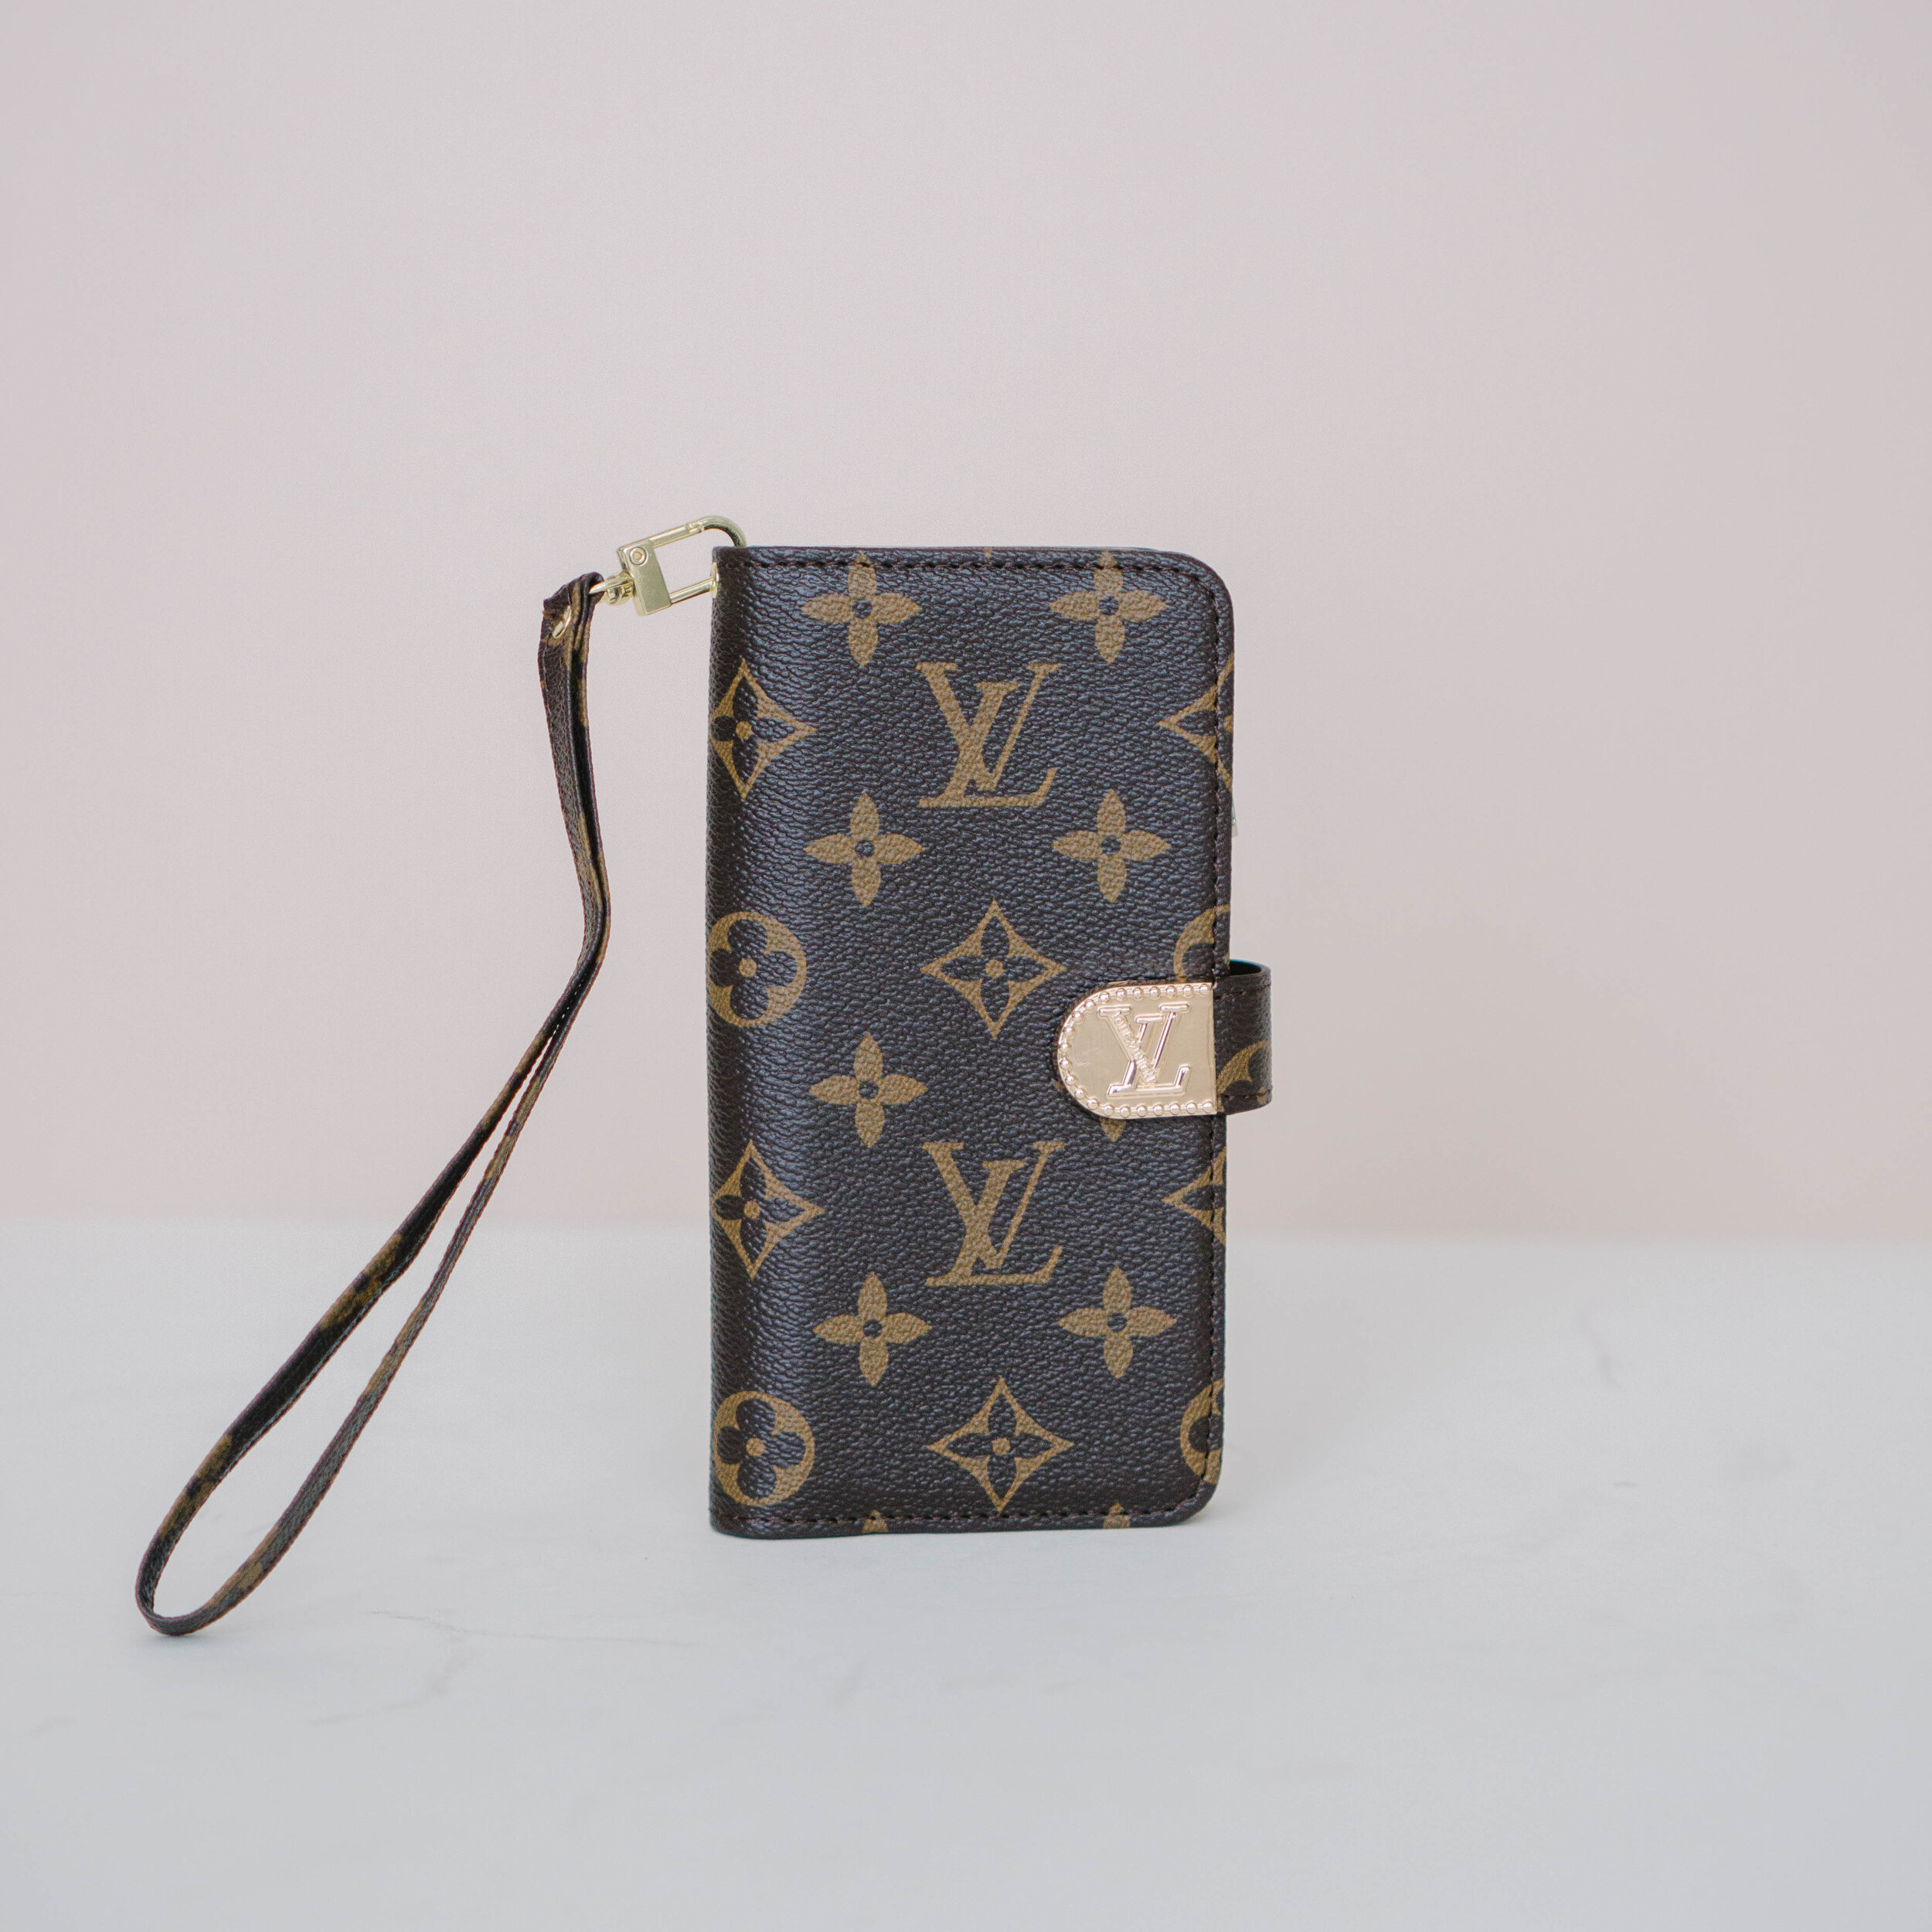 lv iphone case with card holder